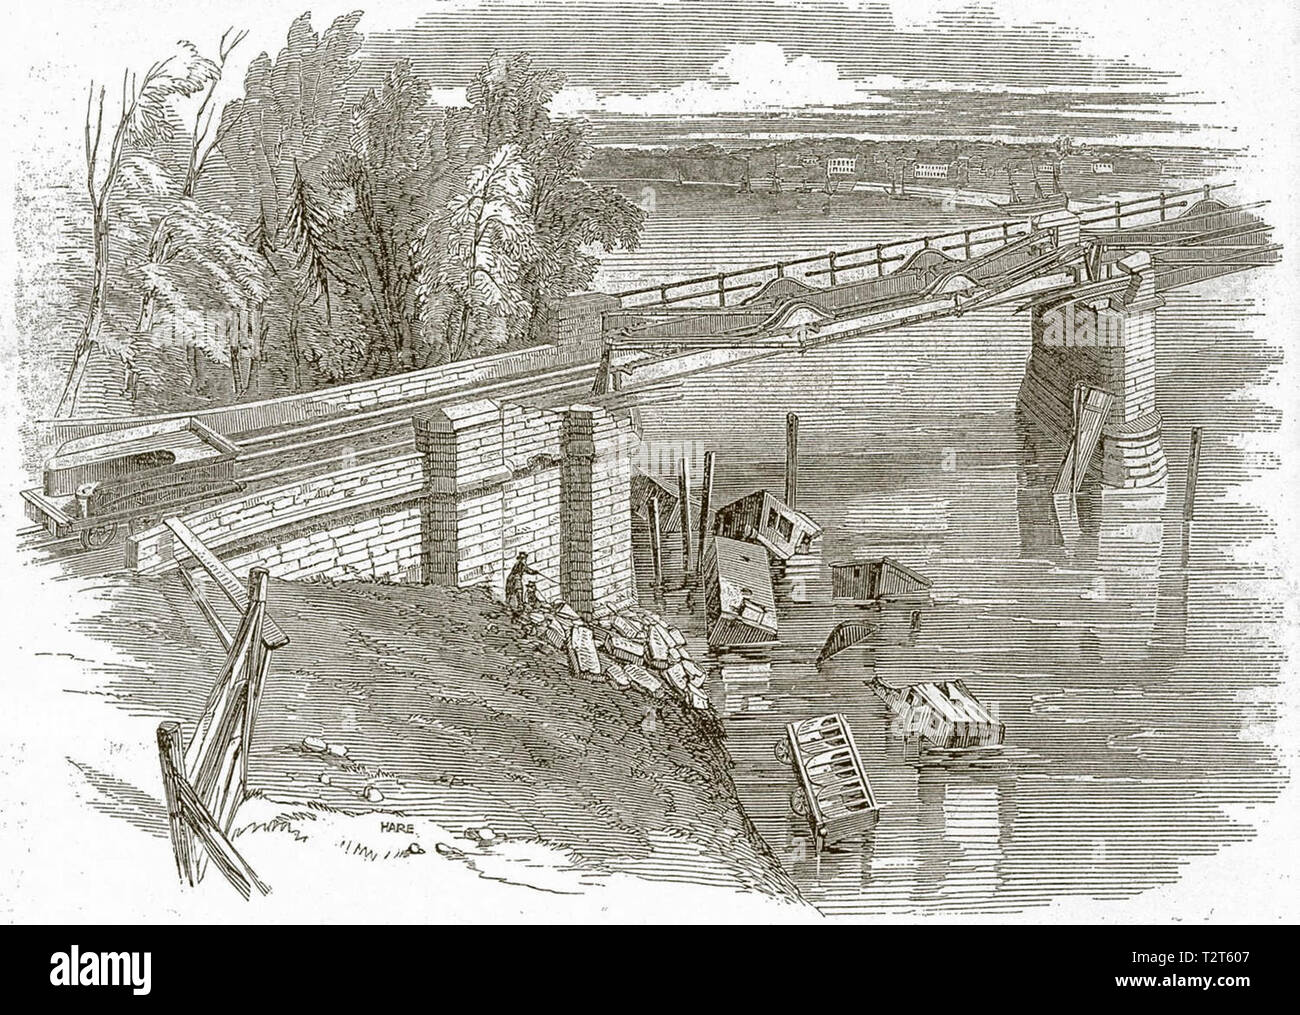 The Illustrated London News etching of Dee bridge disaster, 1847 Stock Photo